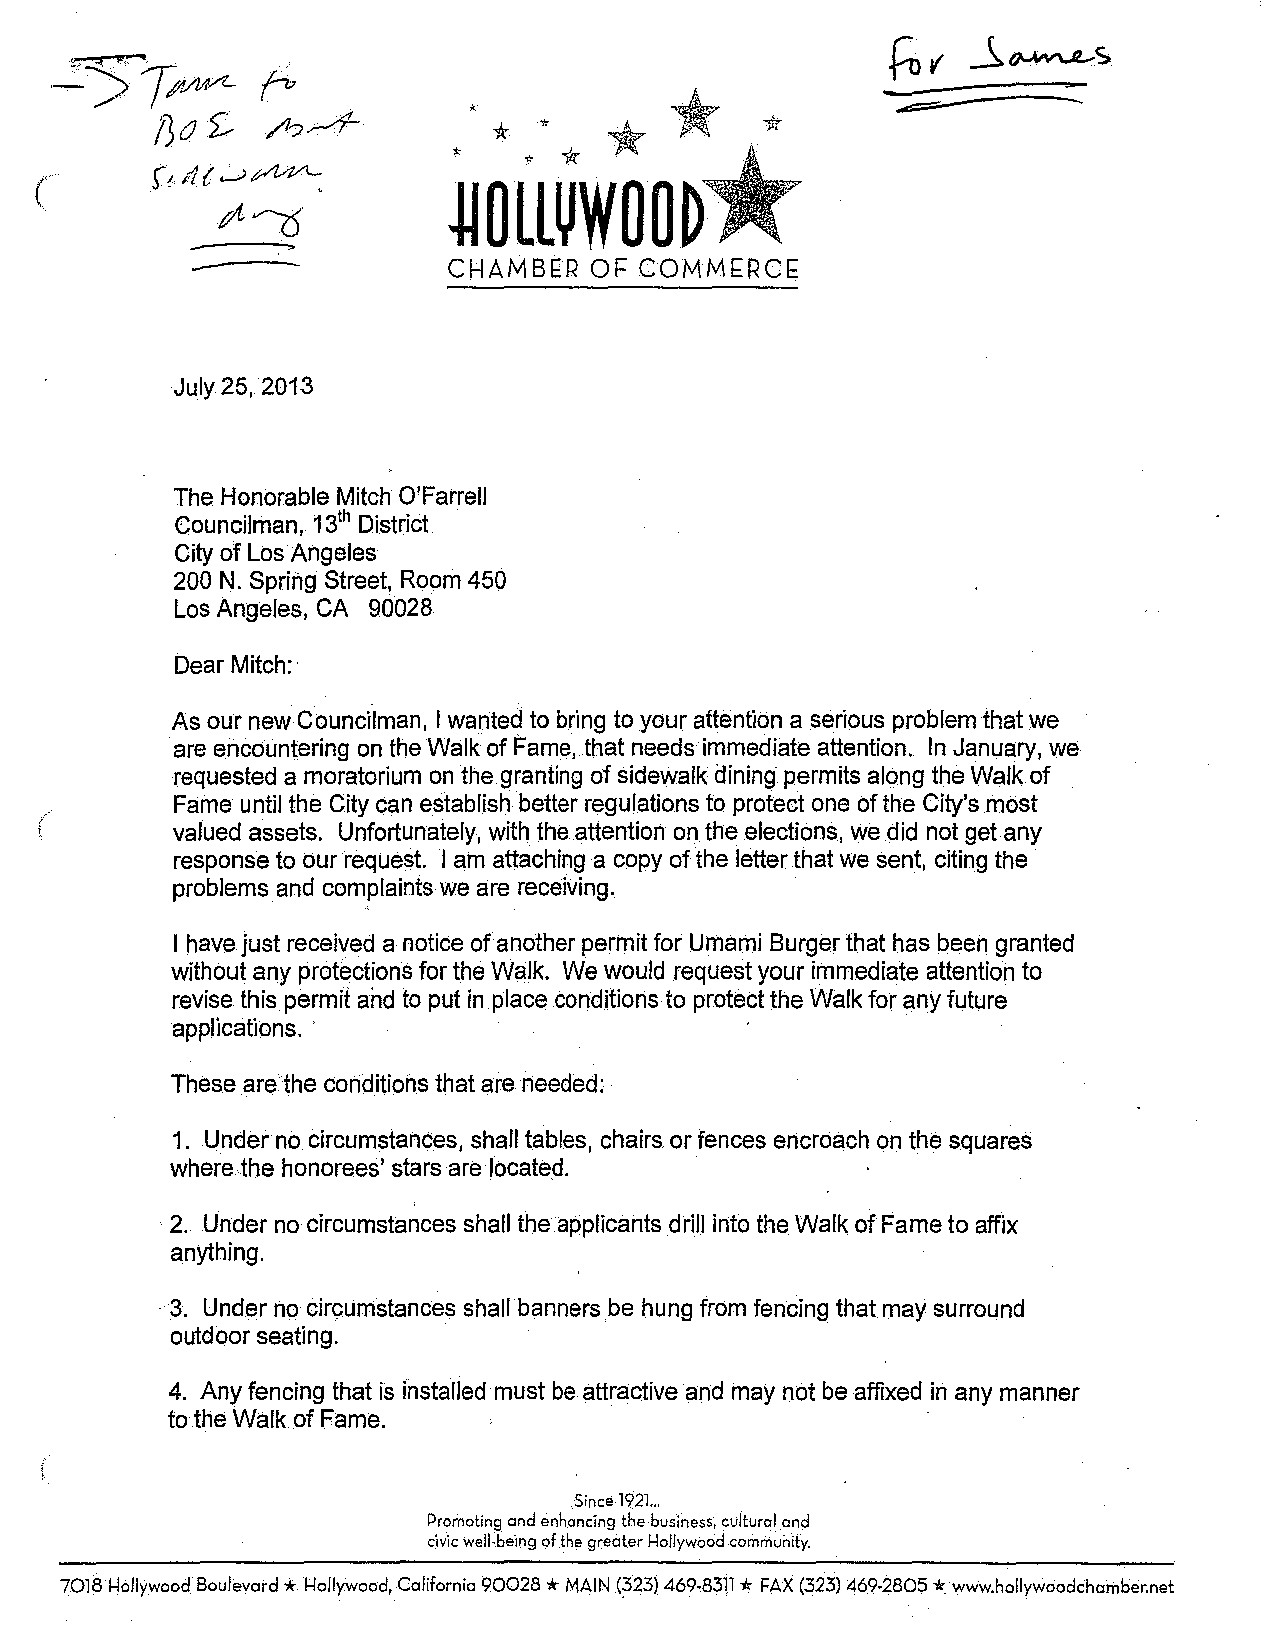 Screen shot of a Hollywood Chamber of Commerce Notification Letter